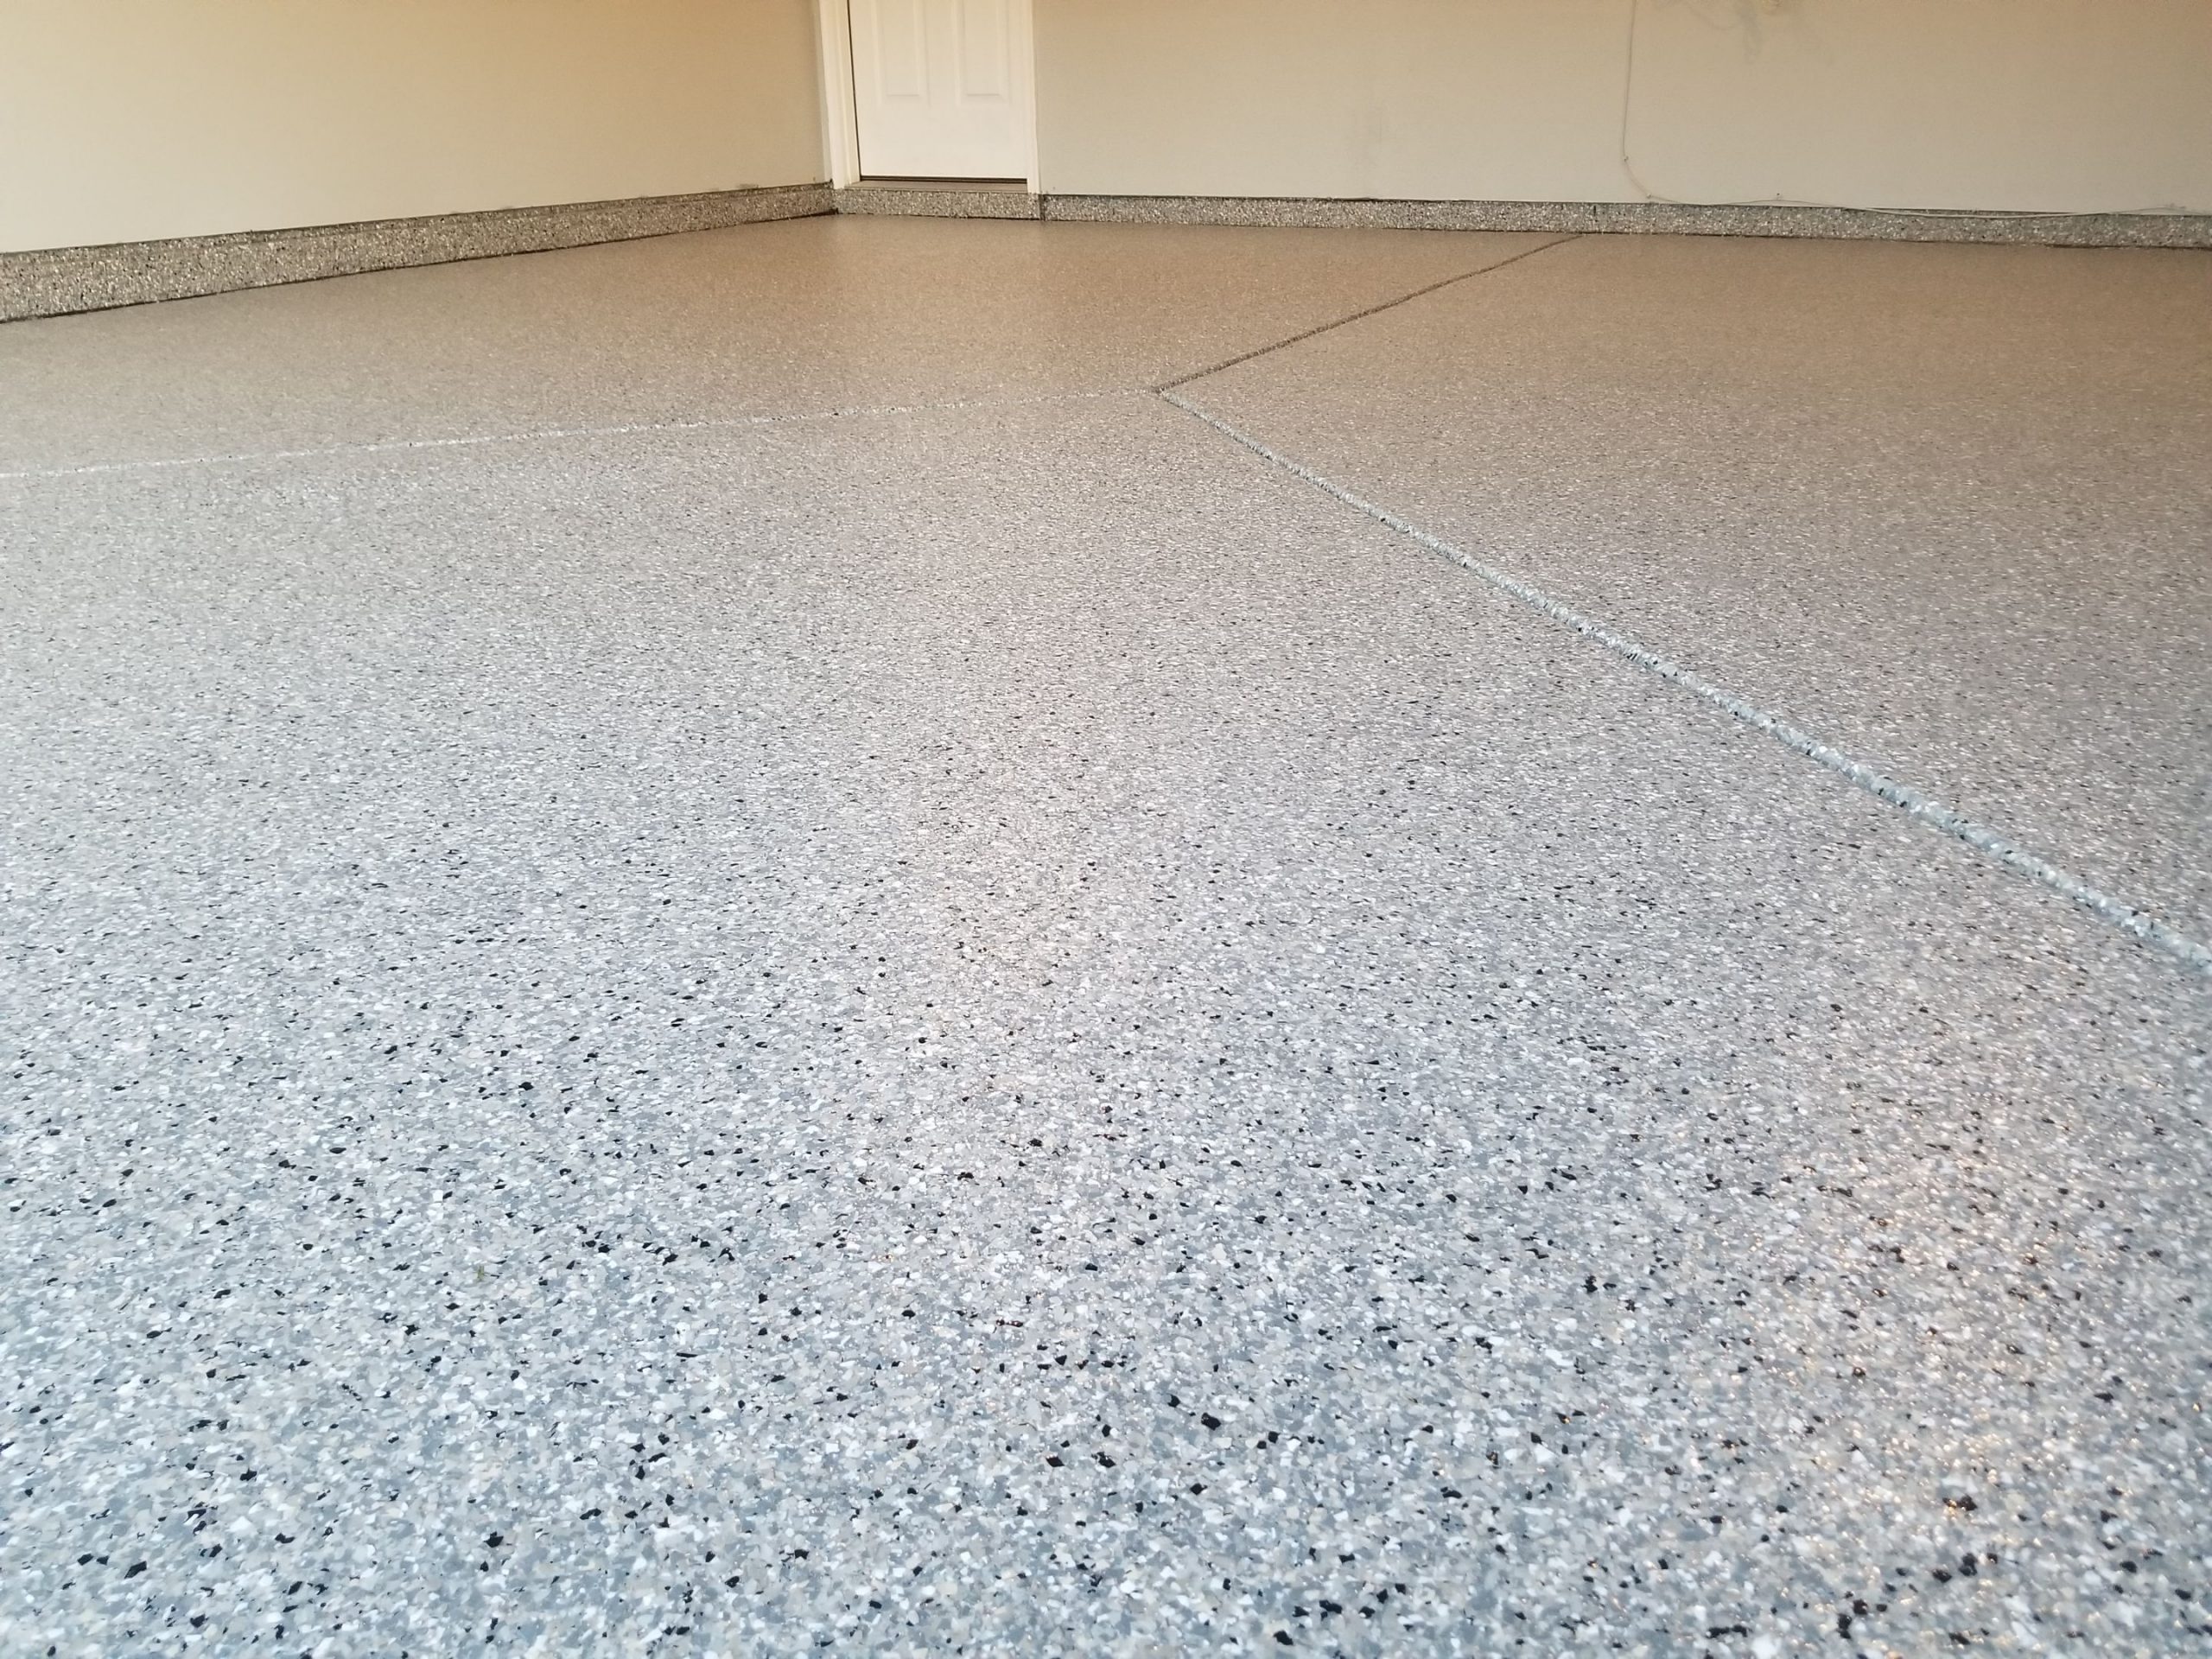 Are coated garage floor surfaces created to be non-slip?